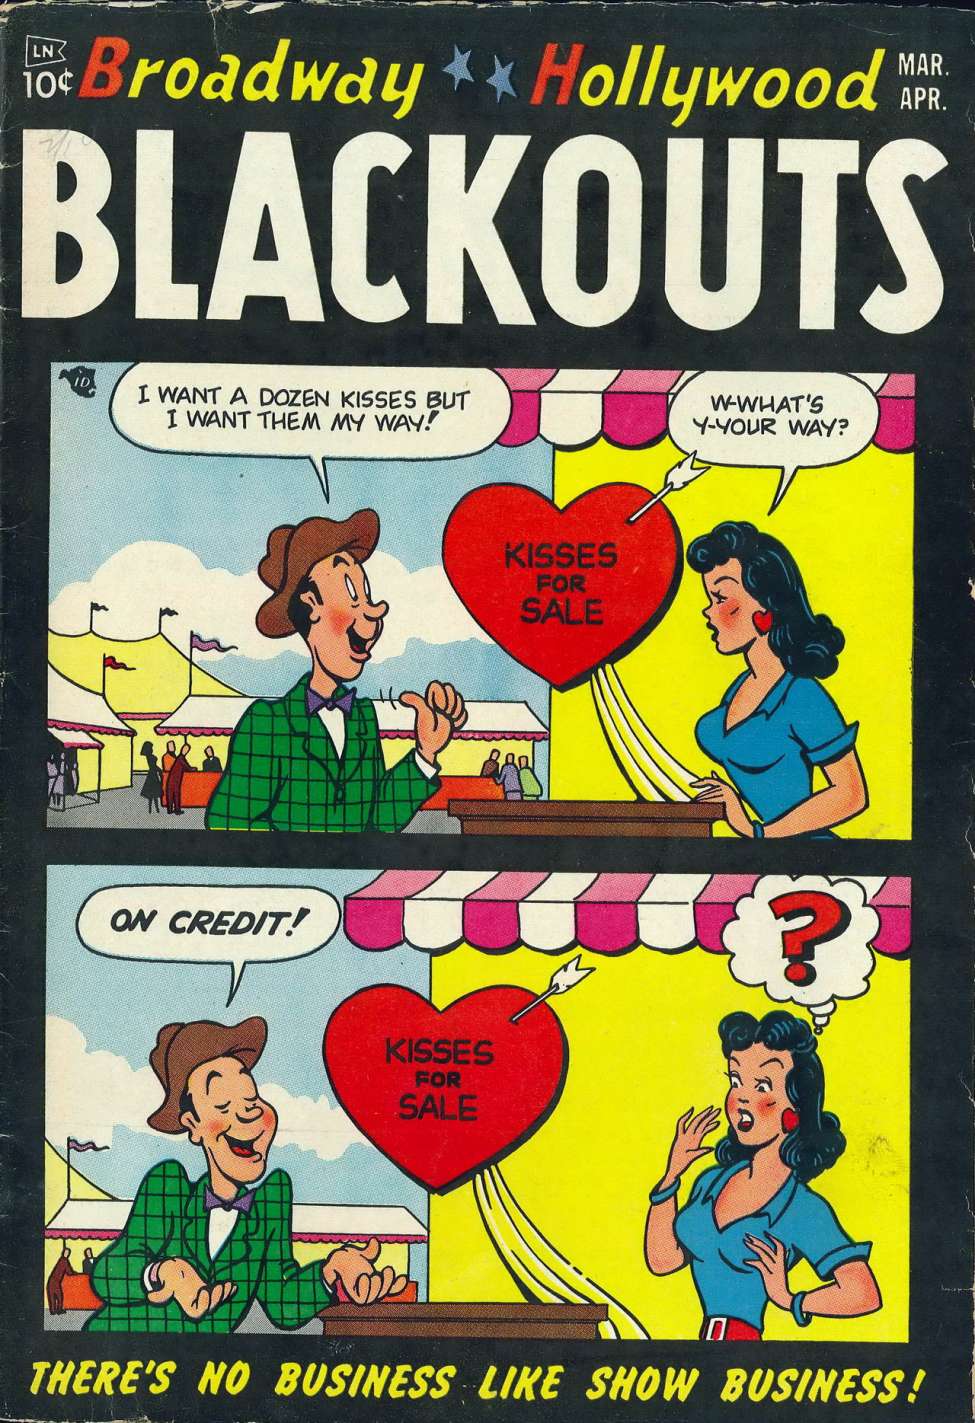 Book Cover For Broadway-Hollywood Blackouts 1